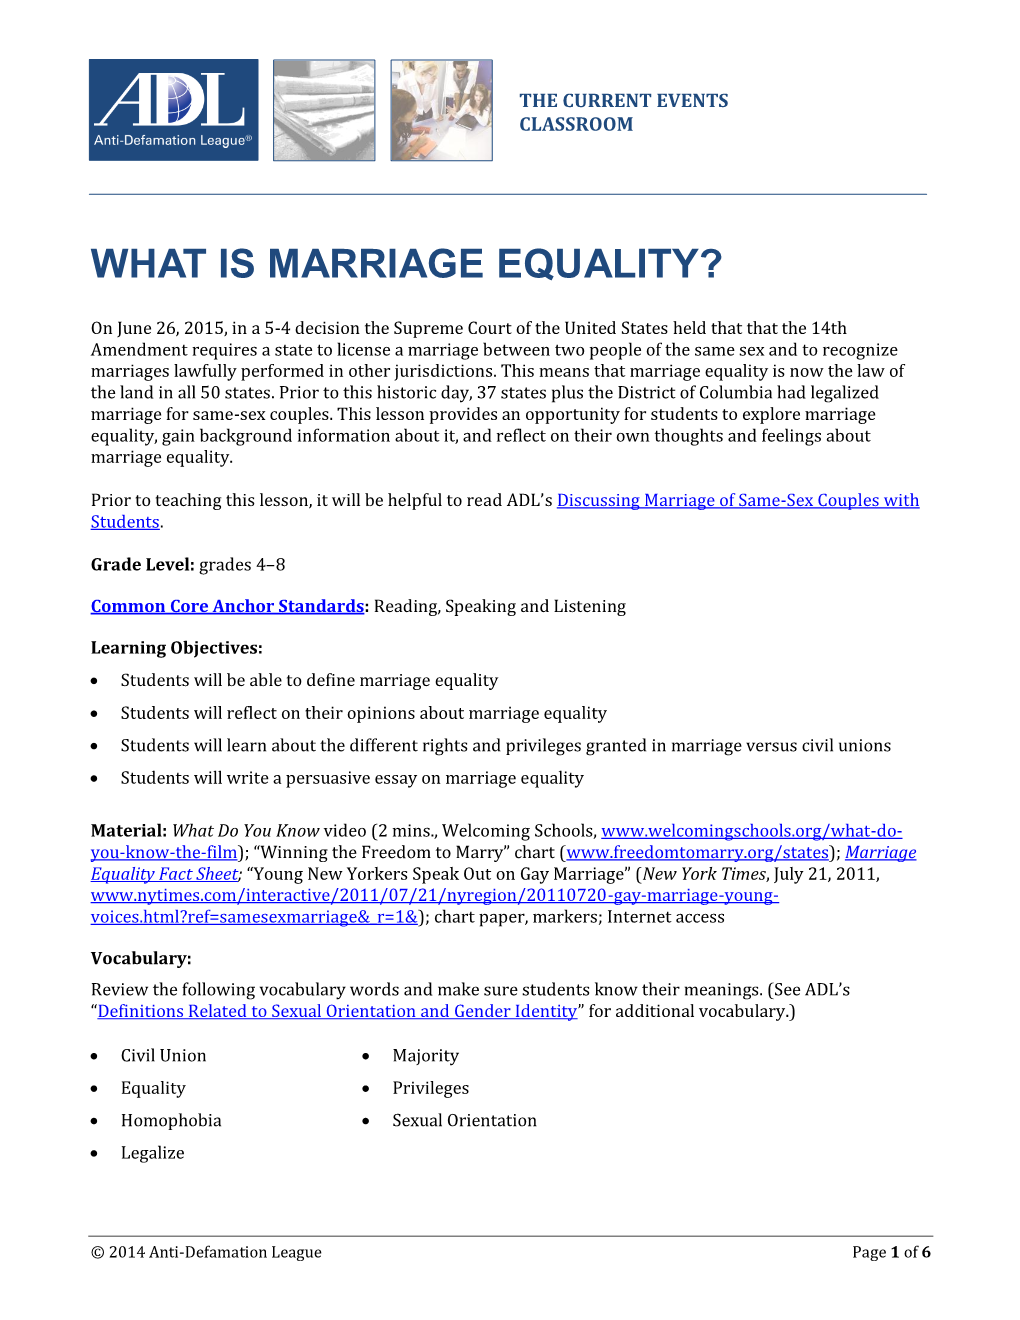 What Is Marriage Equality?